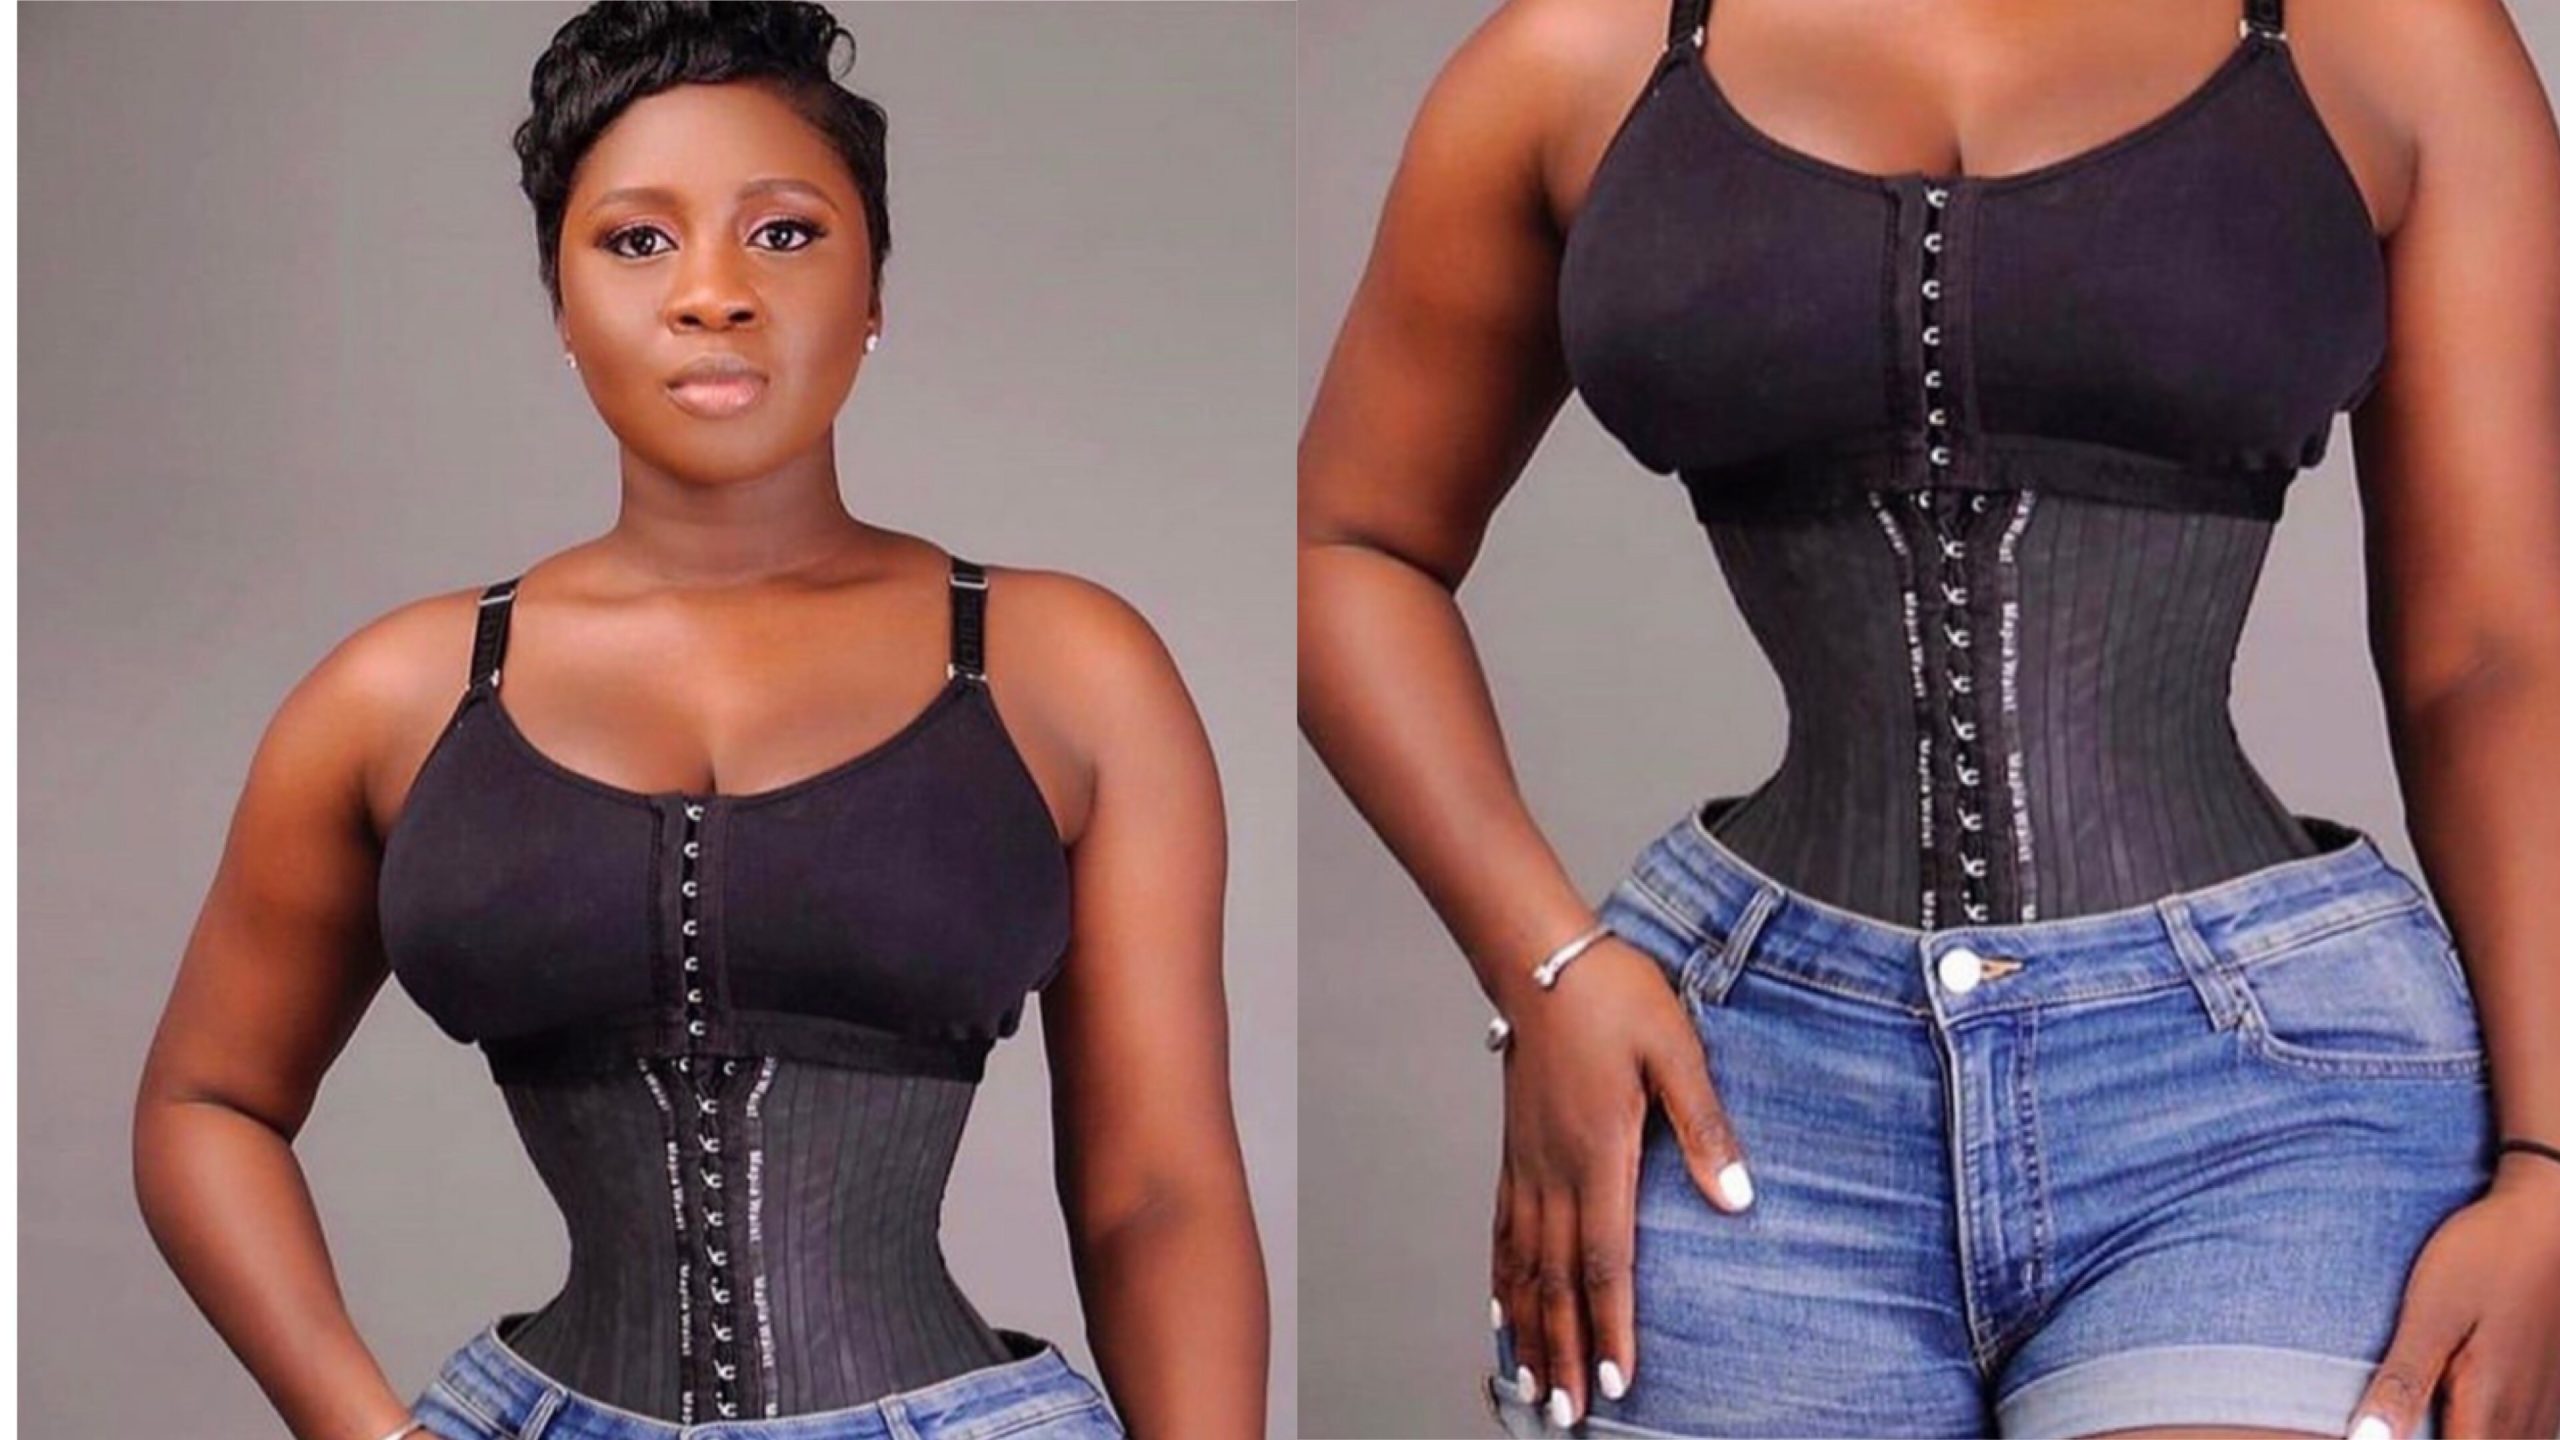 Here are 5 risks associated with wearing waist trainers.